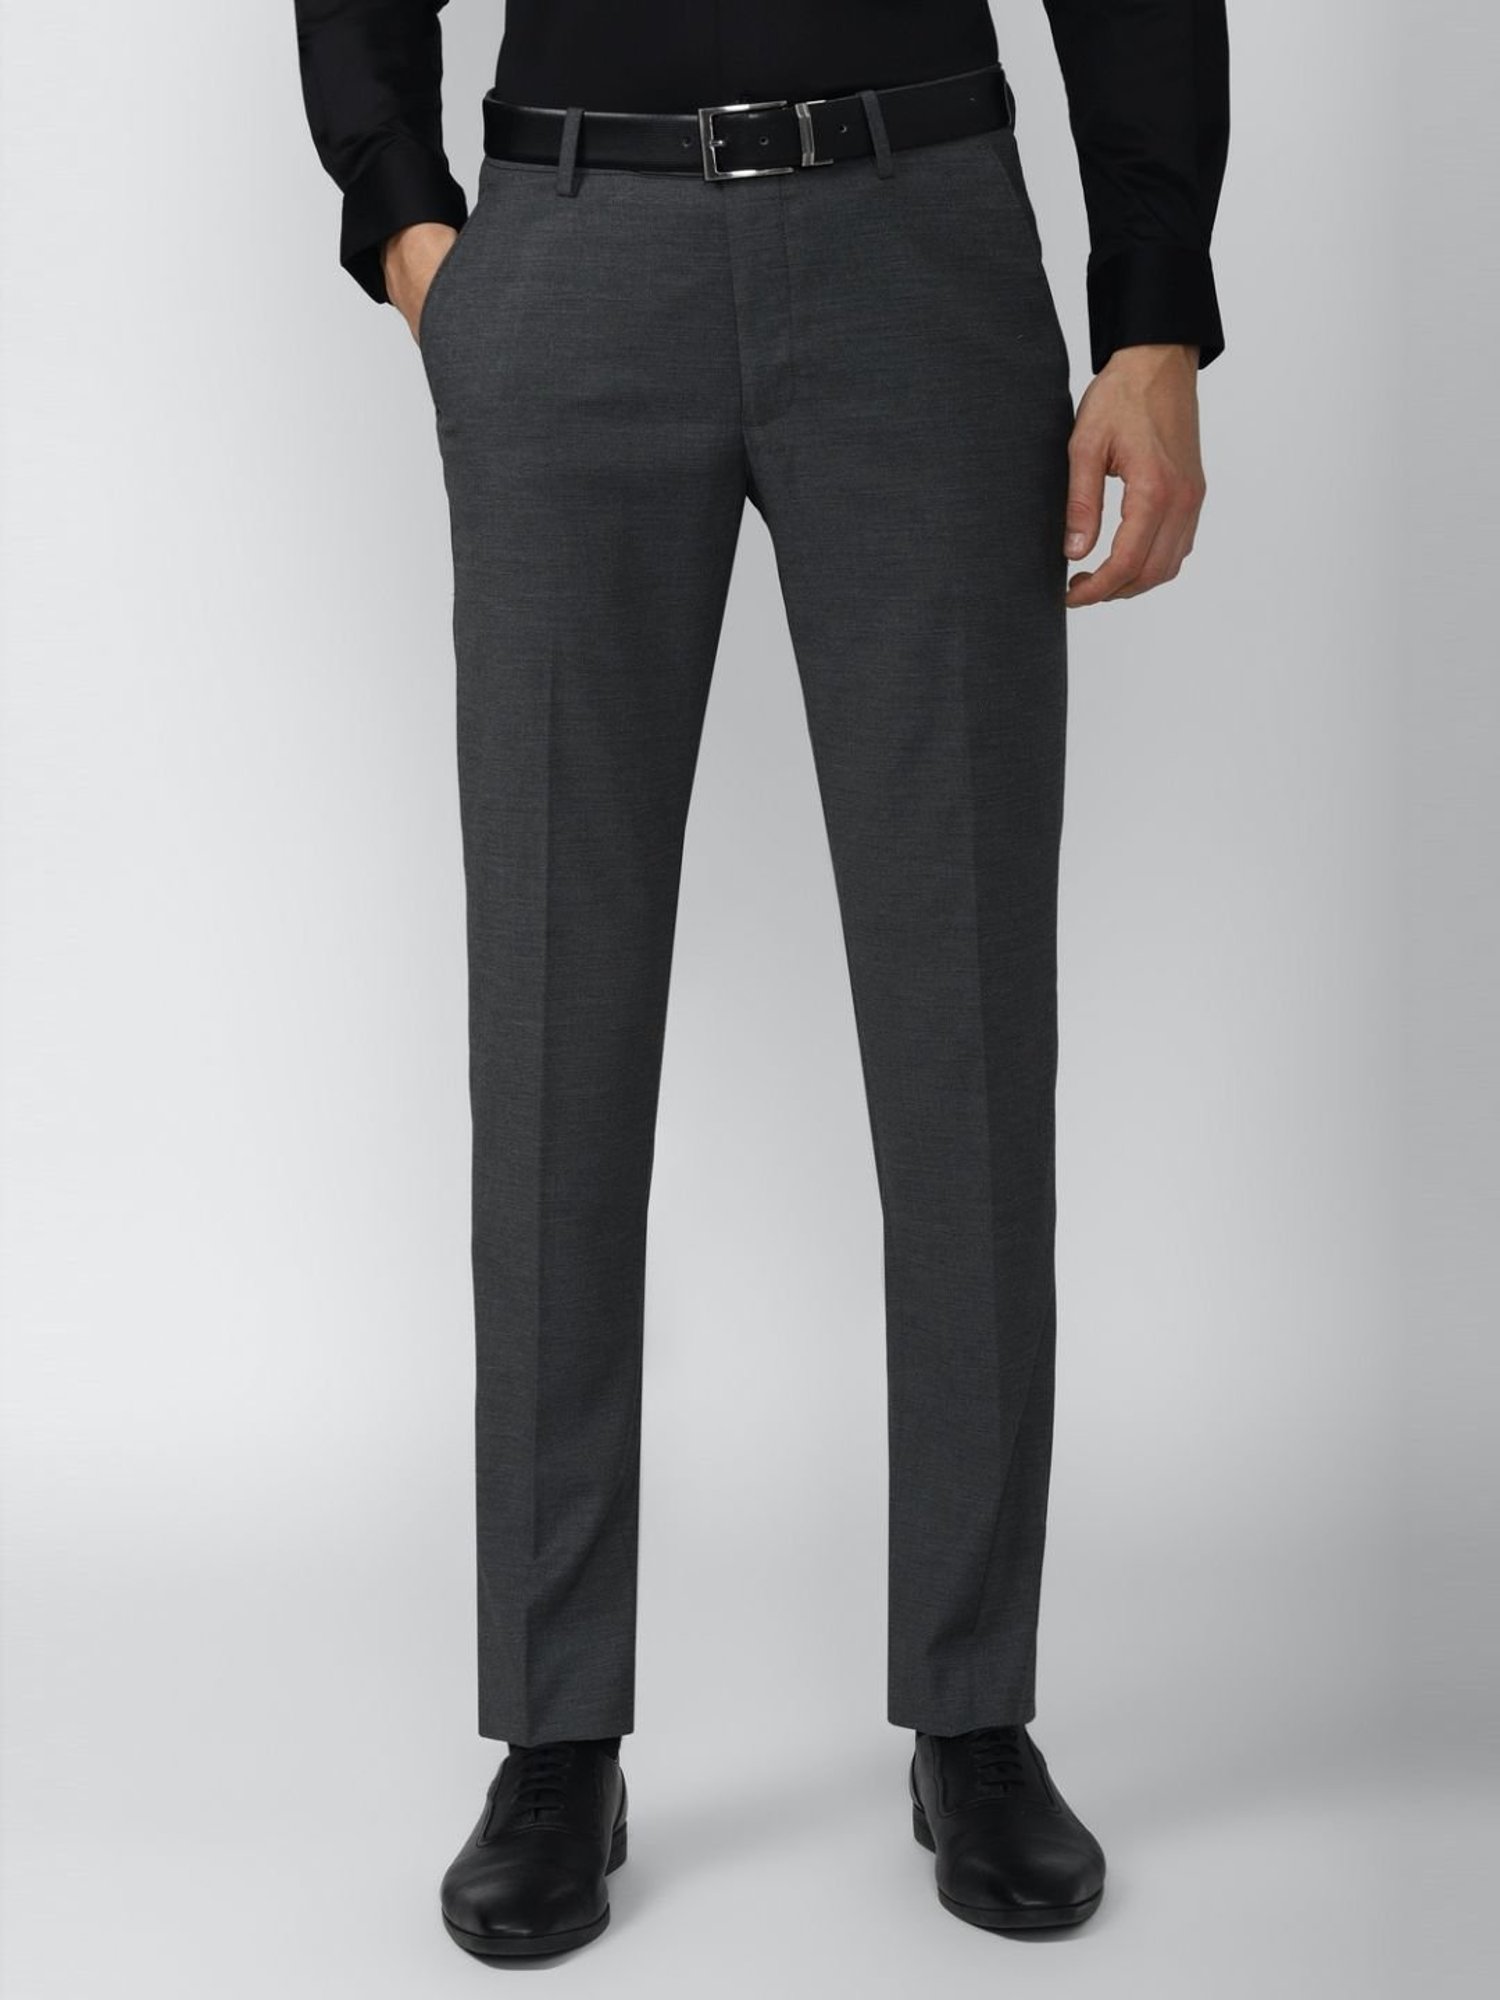 Buy Peter England Grey Slim Fit Self Pattern Trousers for Mens Online   Tata CLiQ